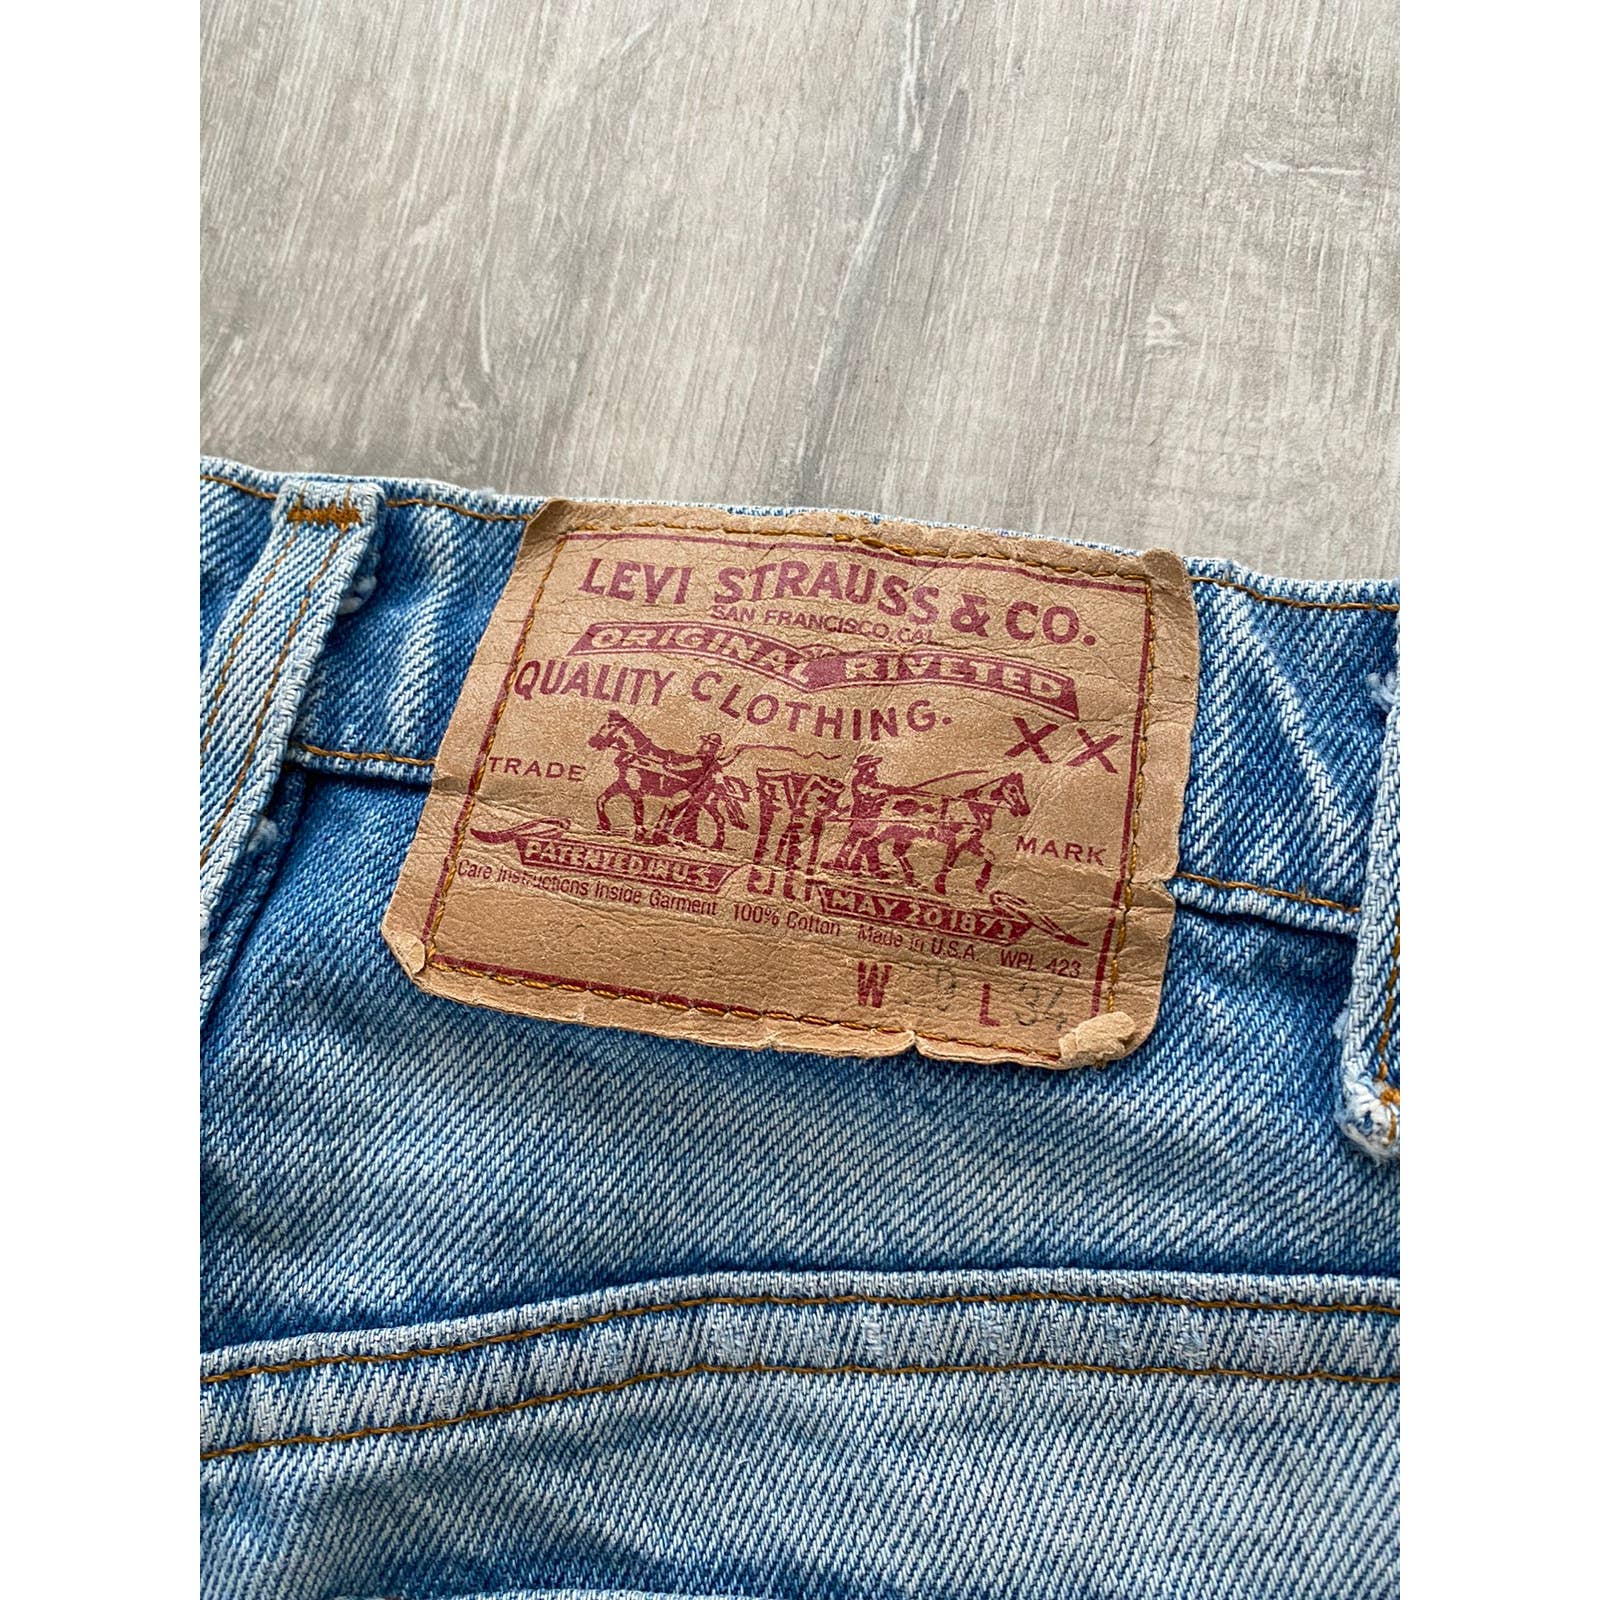 90s Levi's 505 vintage jeans made in USA denim – Refitted